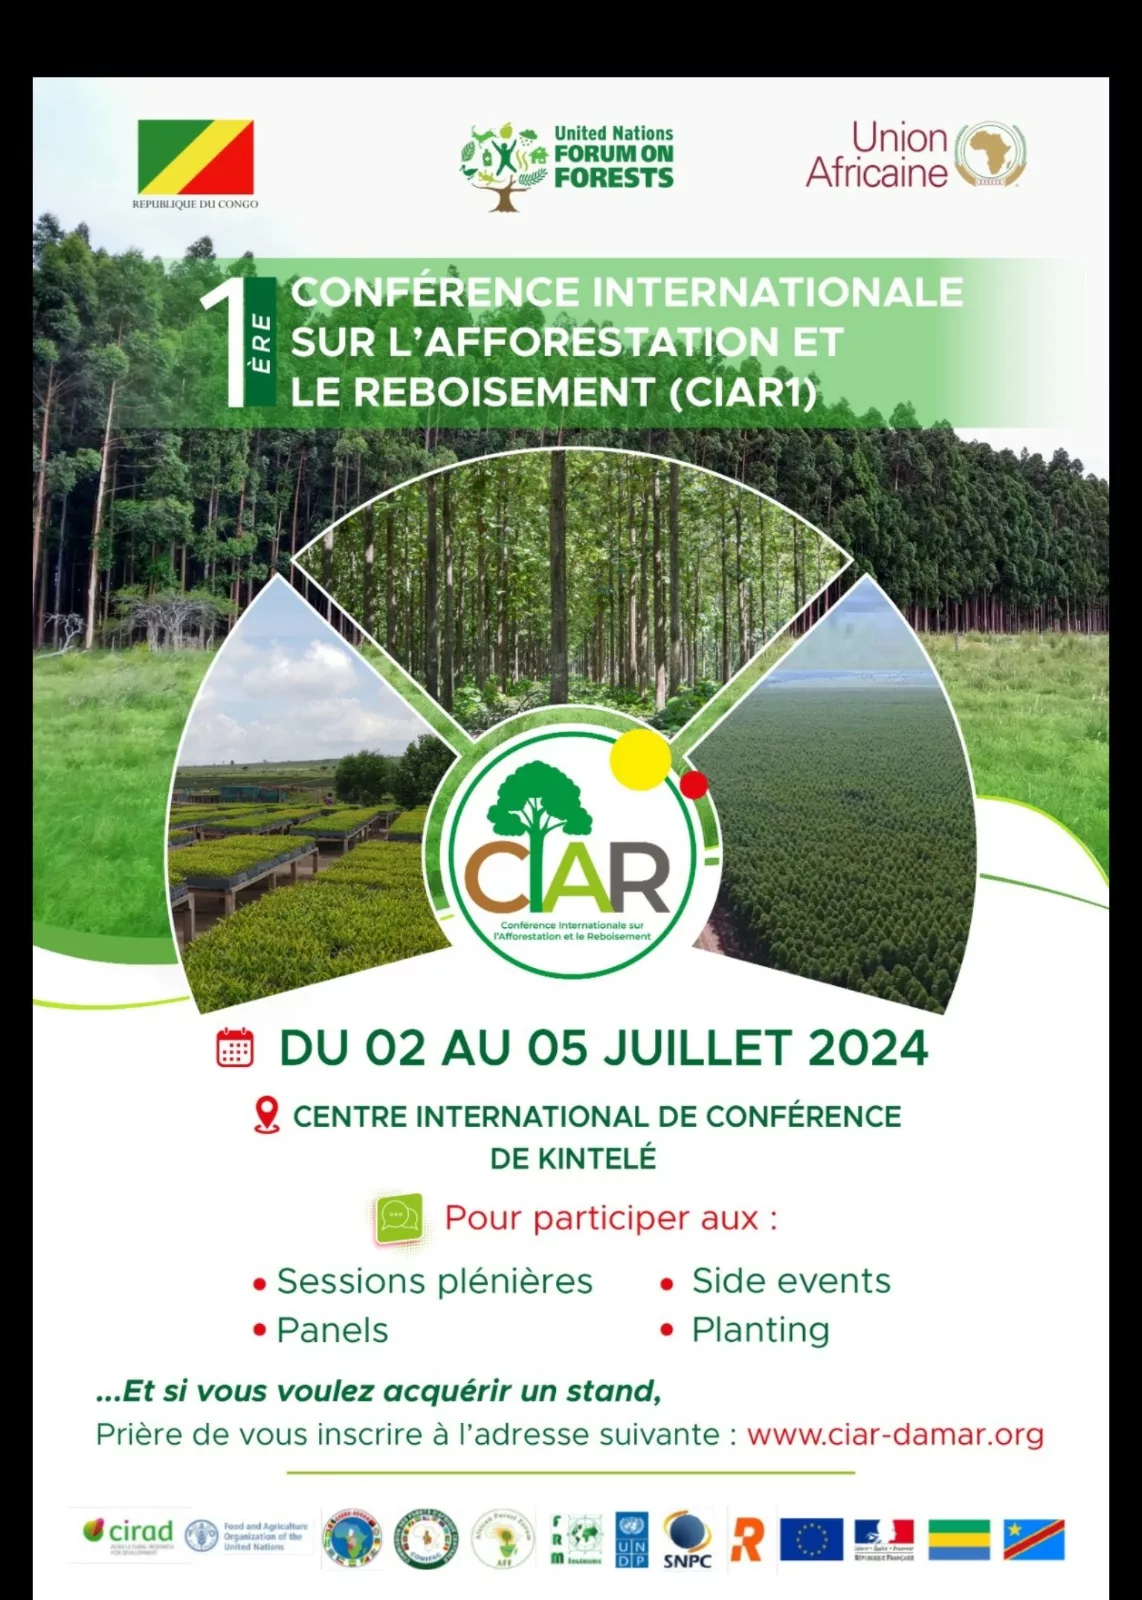 International Conference on Afforestation and Reforestation to be Held in Brazzaville